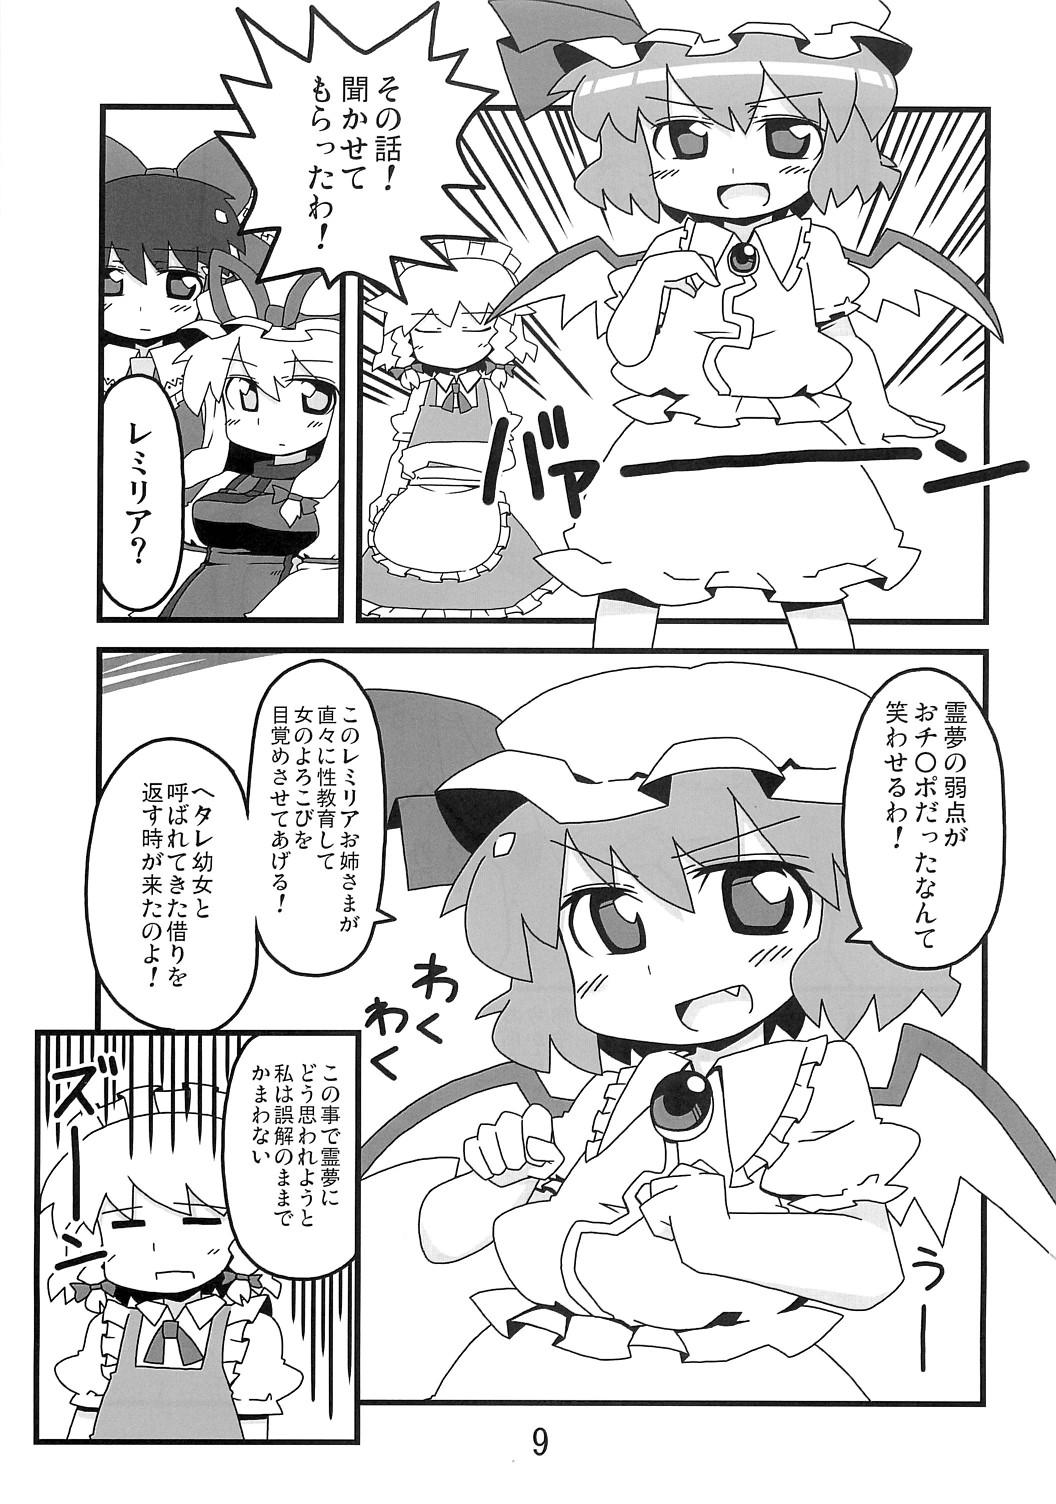 Bhabi 東方豊年祭 - Touhou project Cumfacial - Page 8